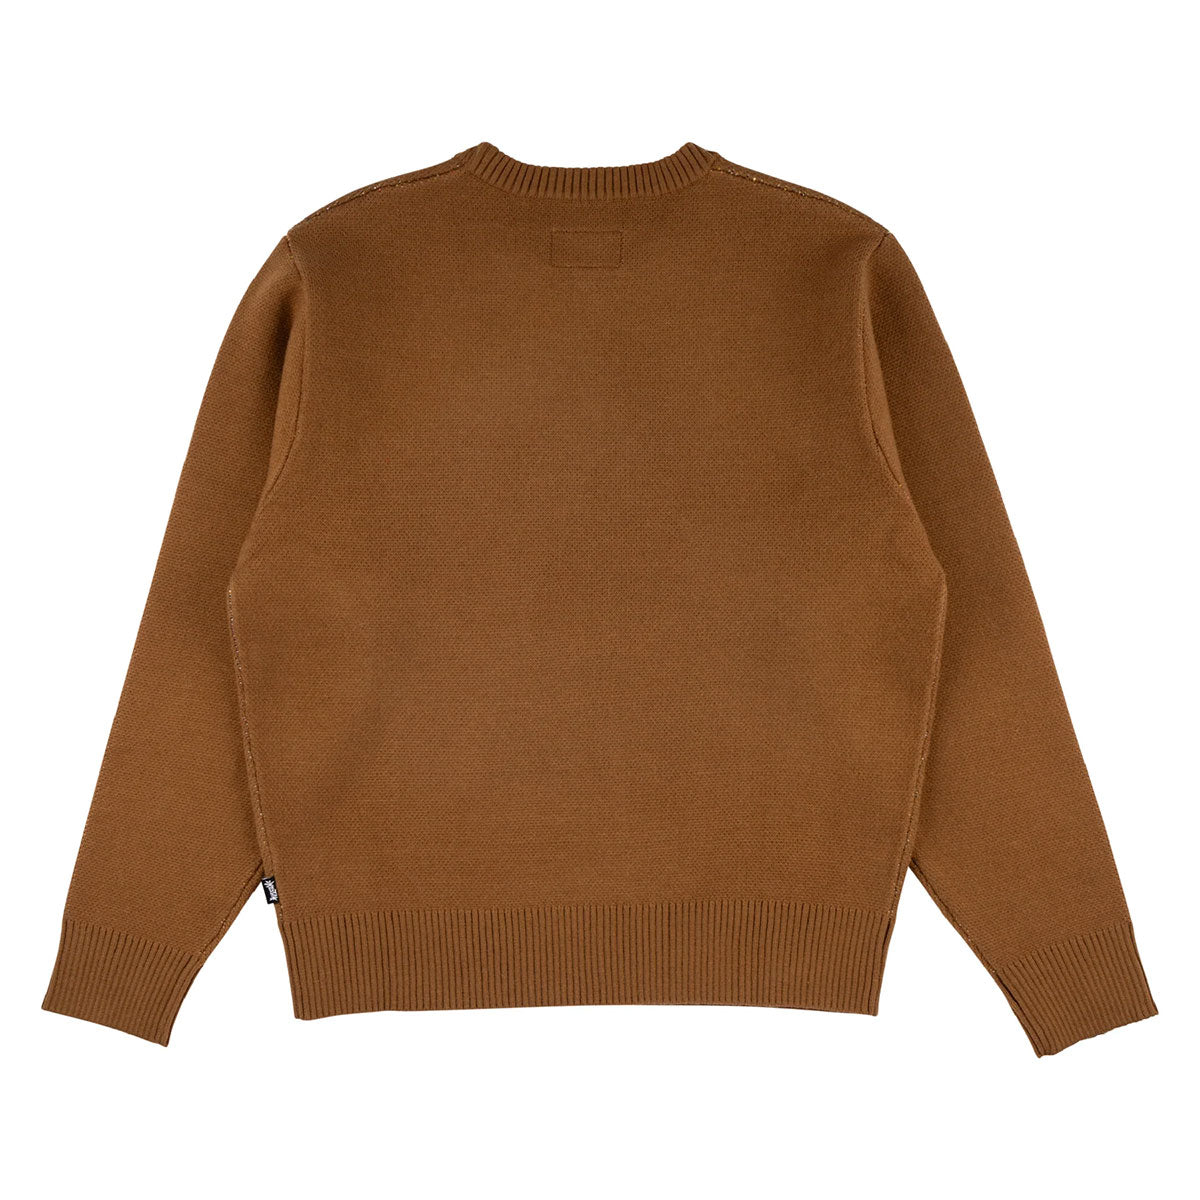 Welcome Lamby Sweater - Brown image 2